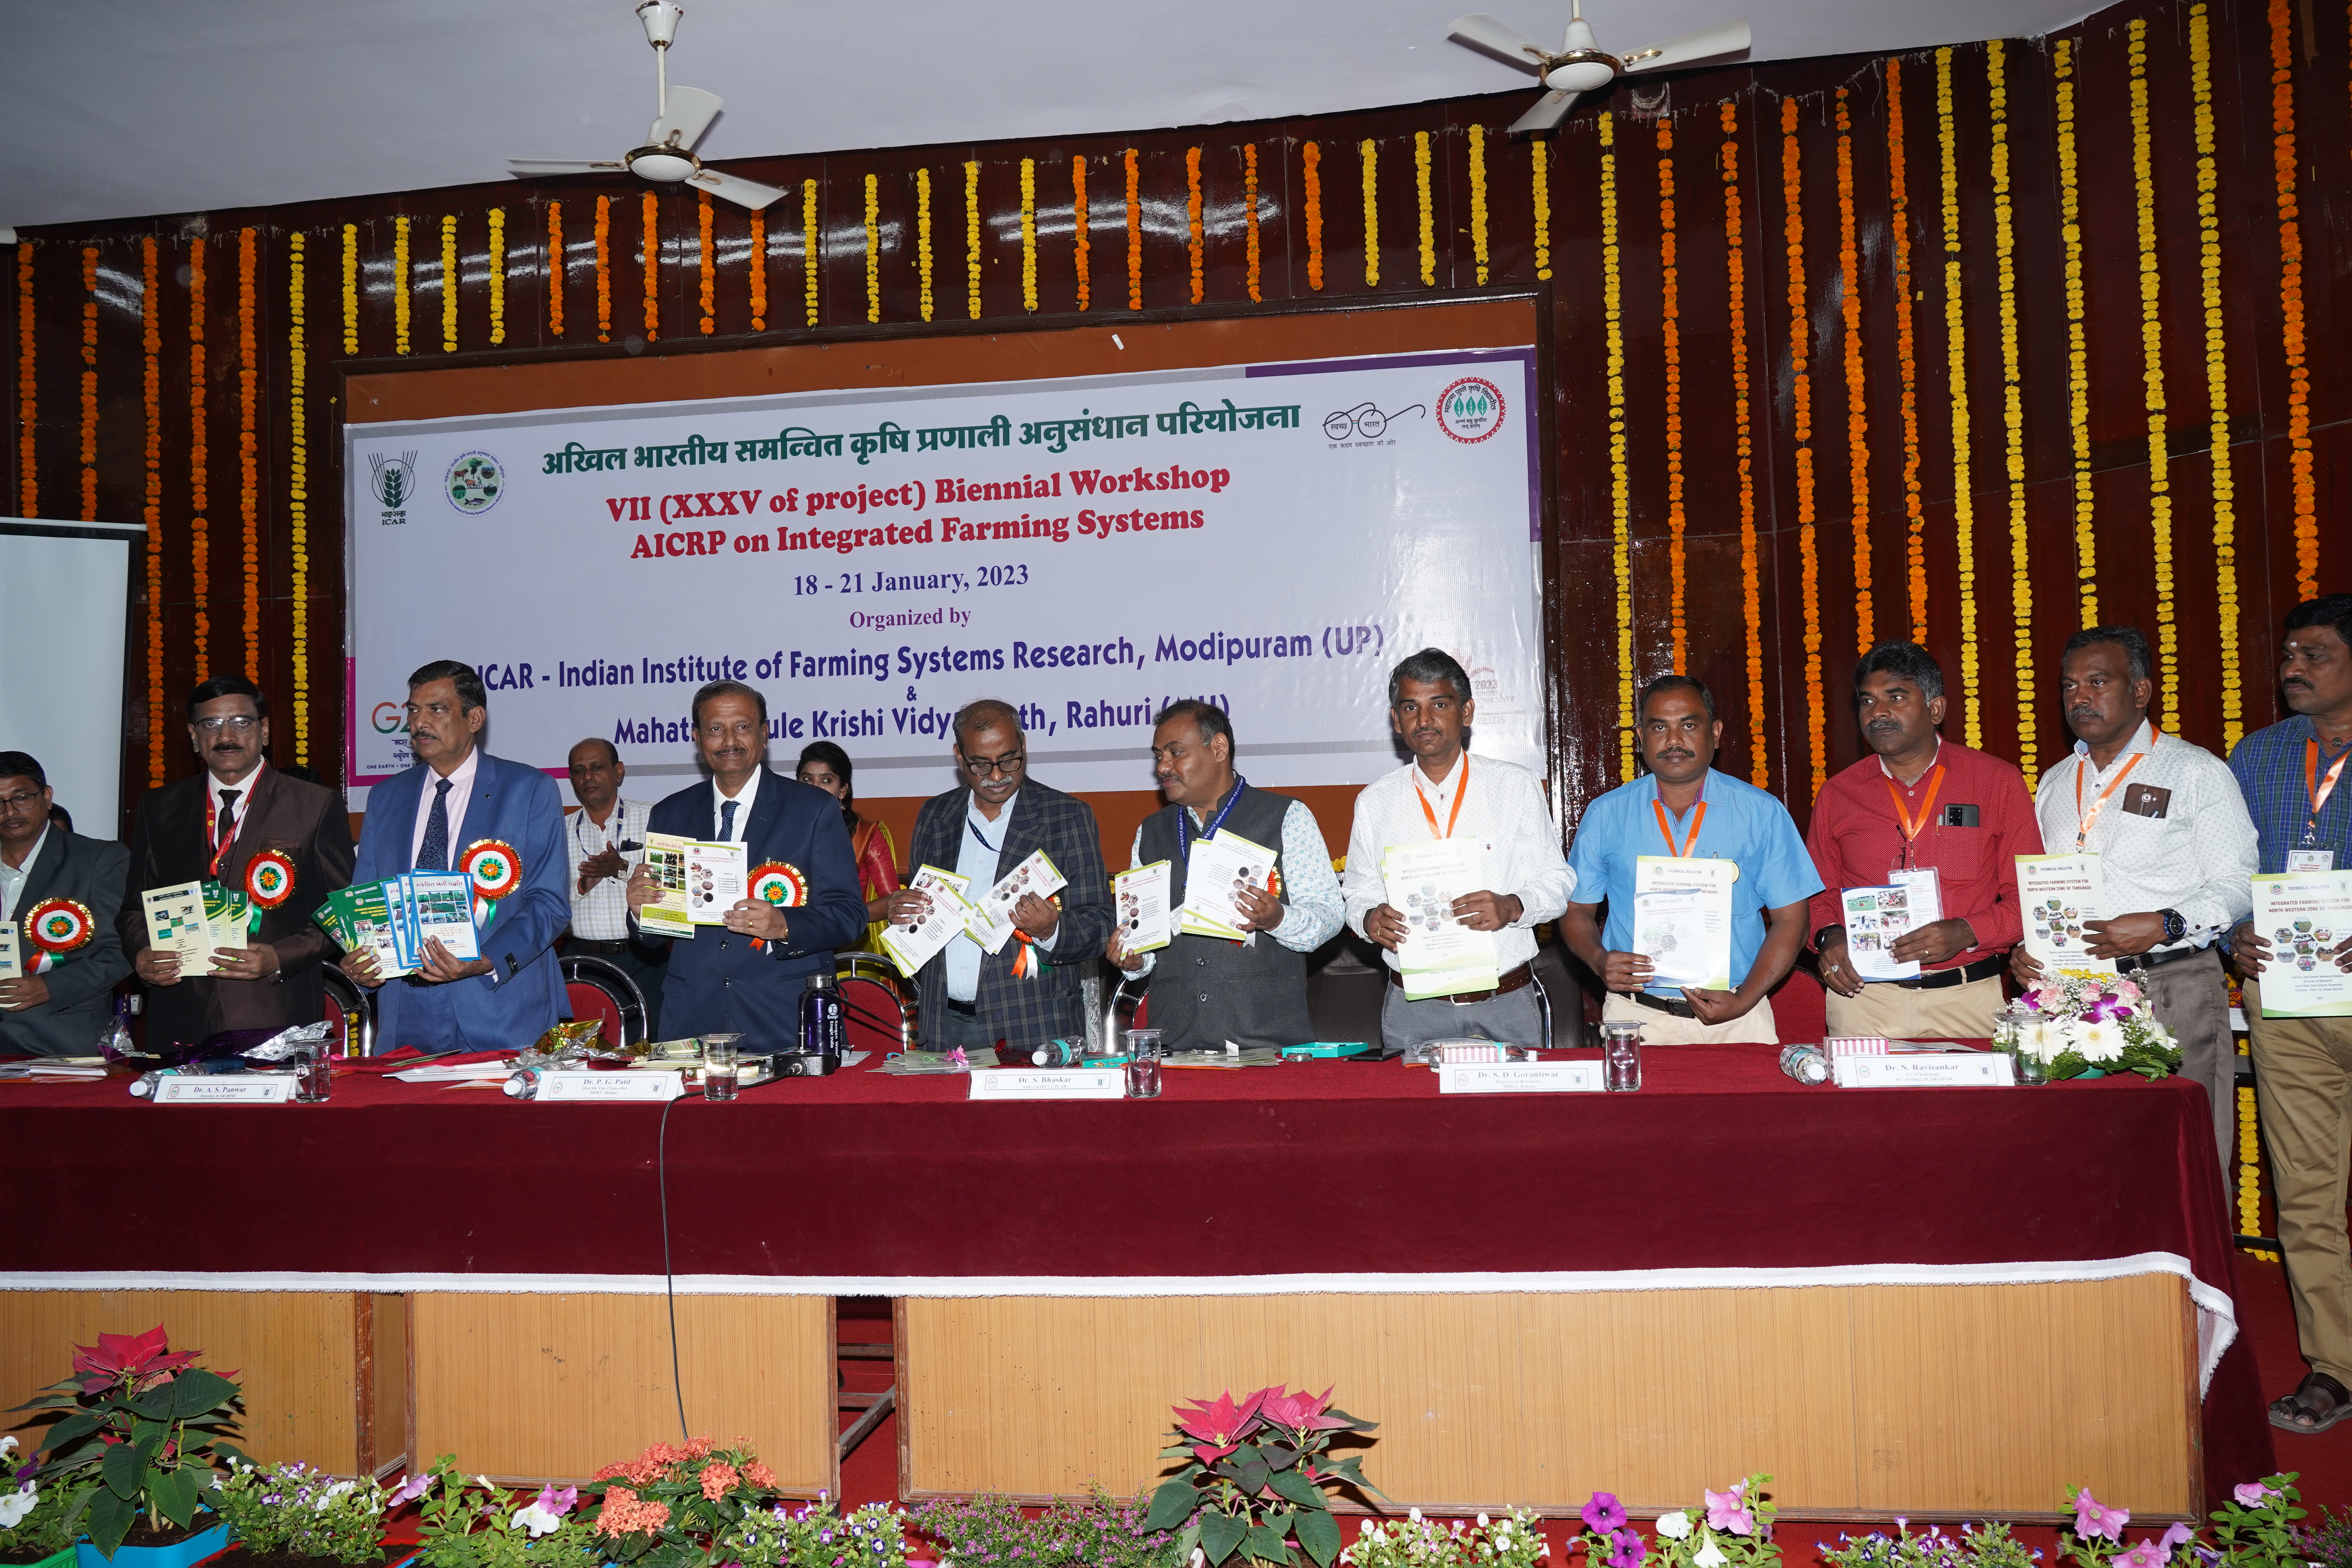 Inauguration of VII Biennial Workshop- AICRP on Integrated Farming Systems 18th January,2023